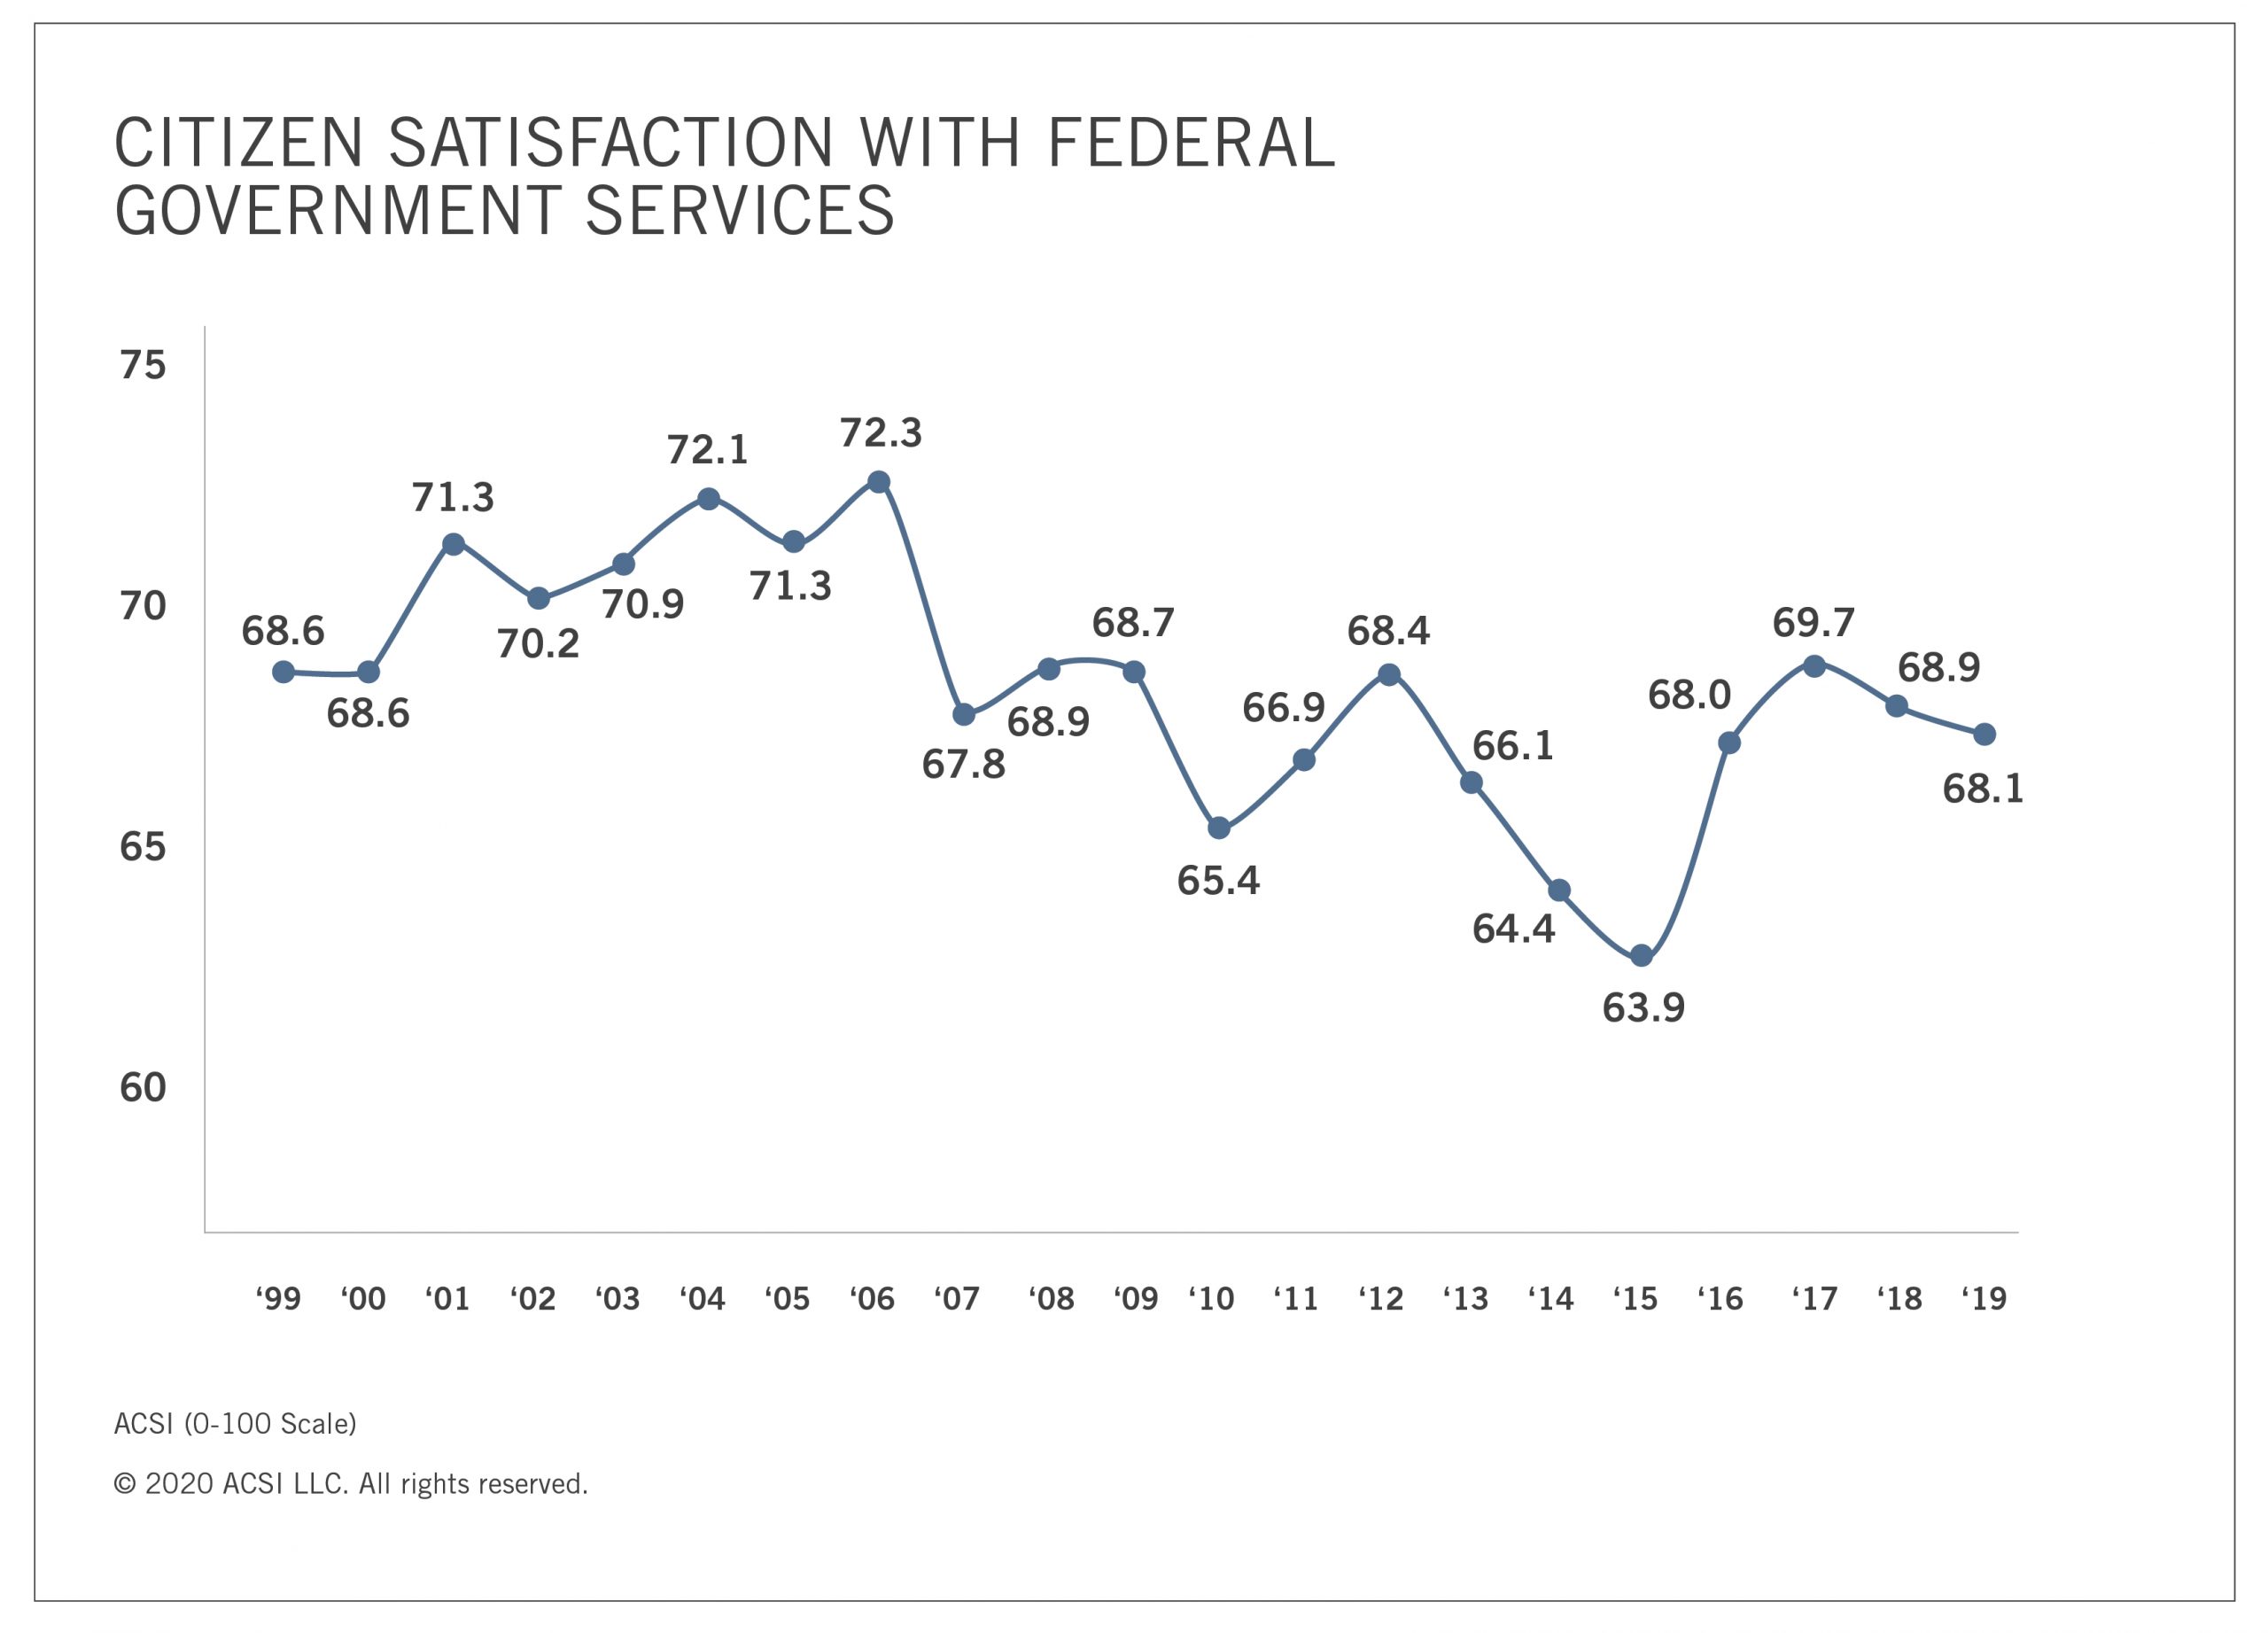 American citizens' satisfaction with federal government services over time.